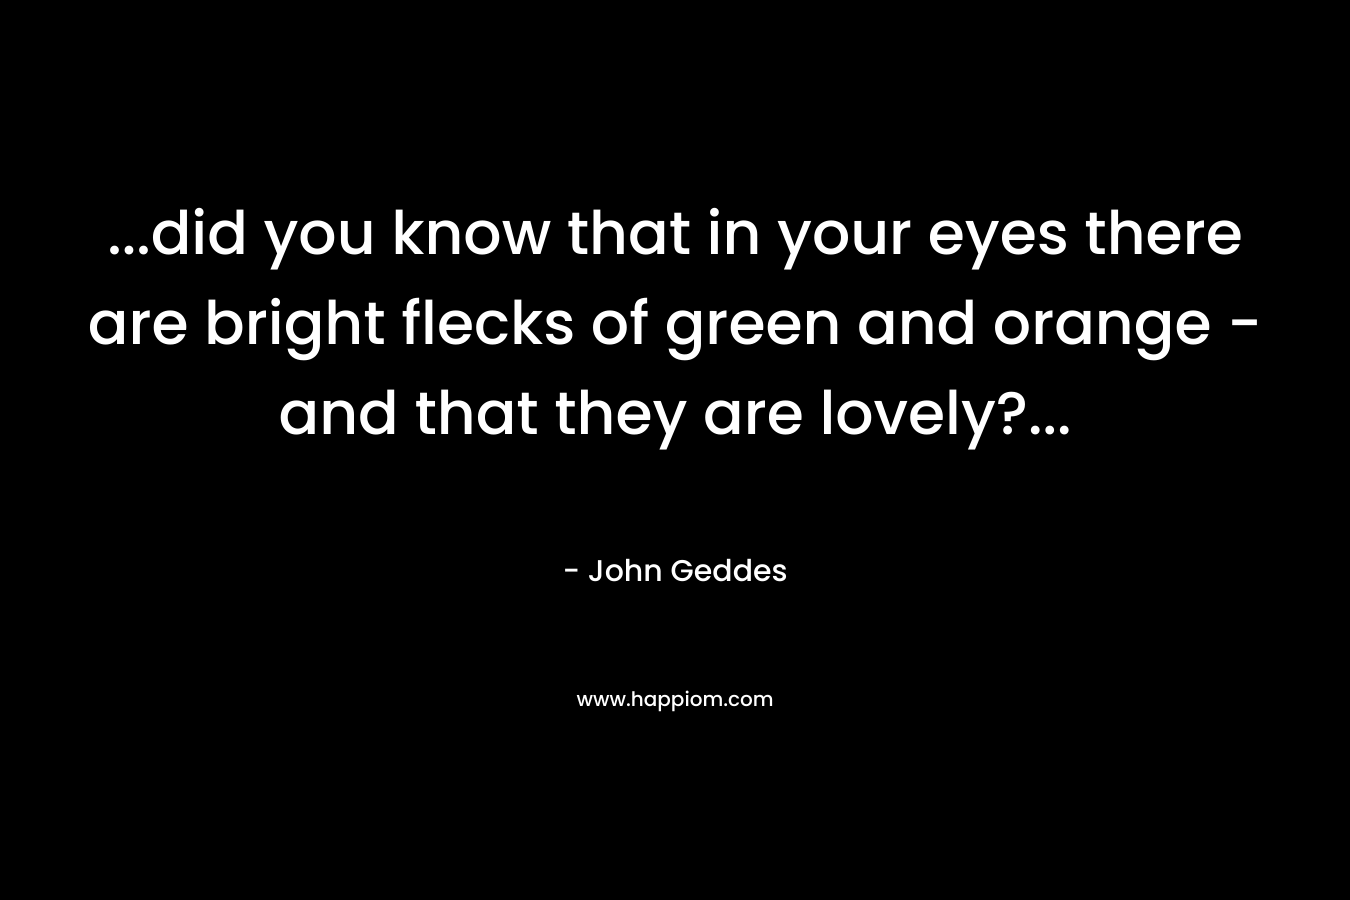 ...did you know that in your eyes there are bright flecks of green and orange - and that they are lovely?...